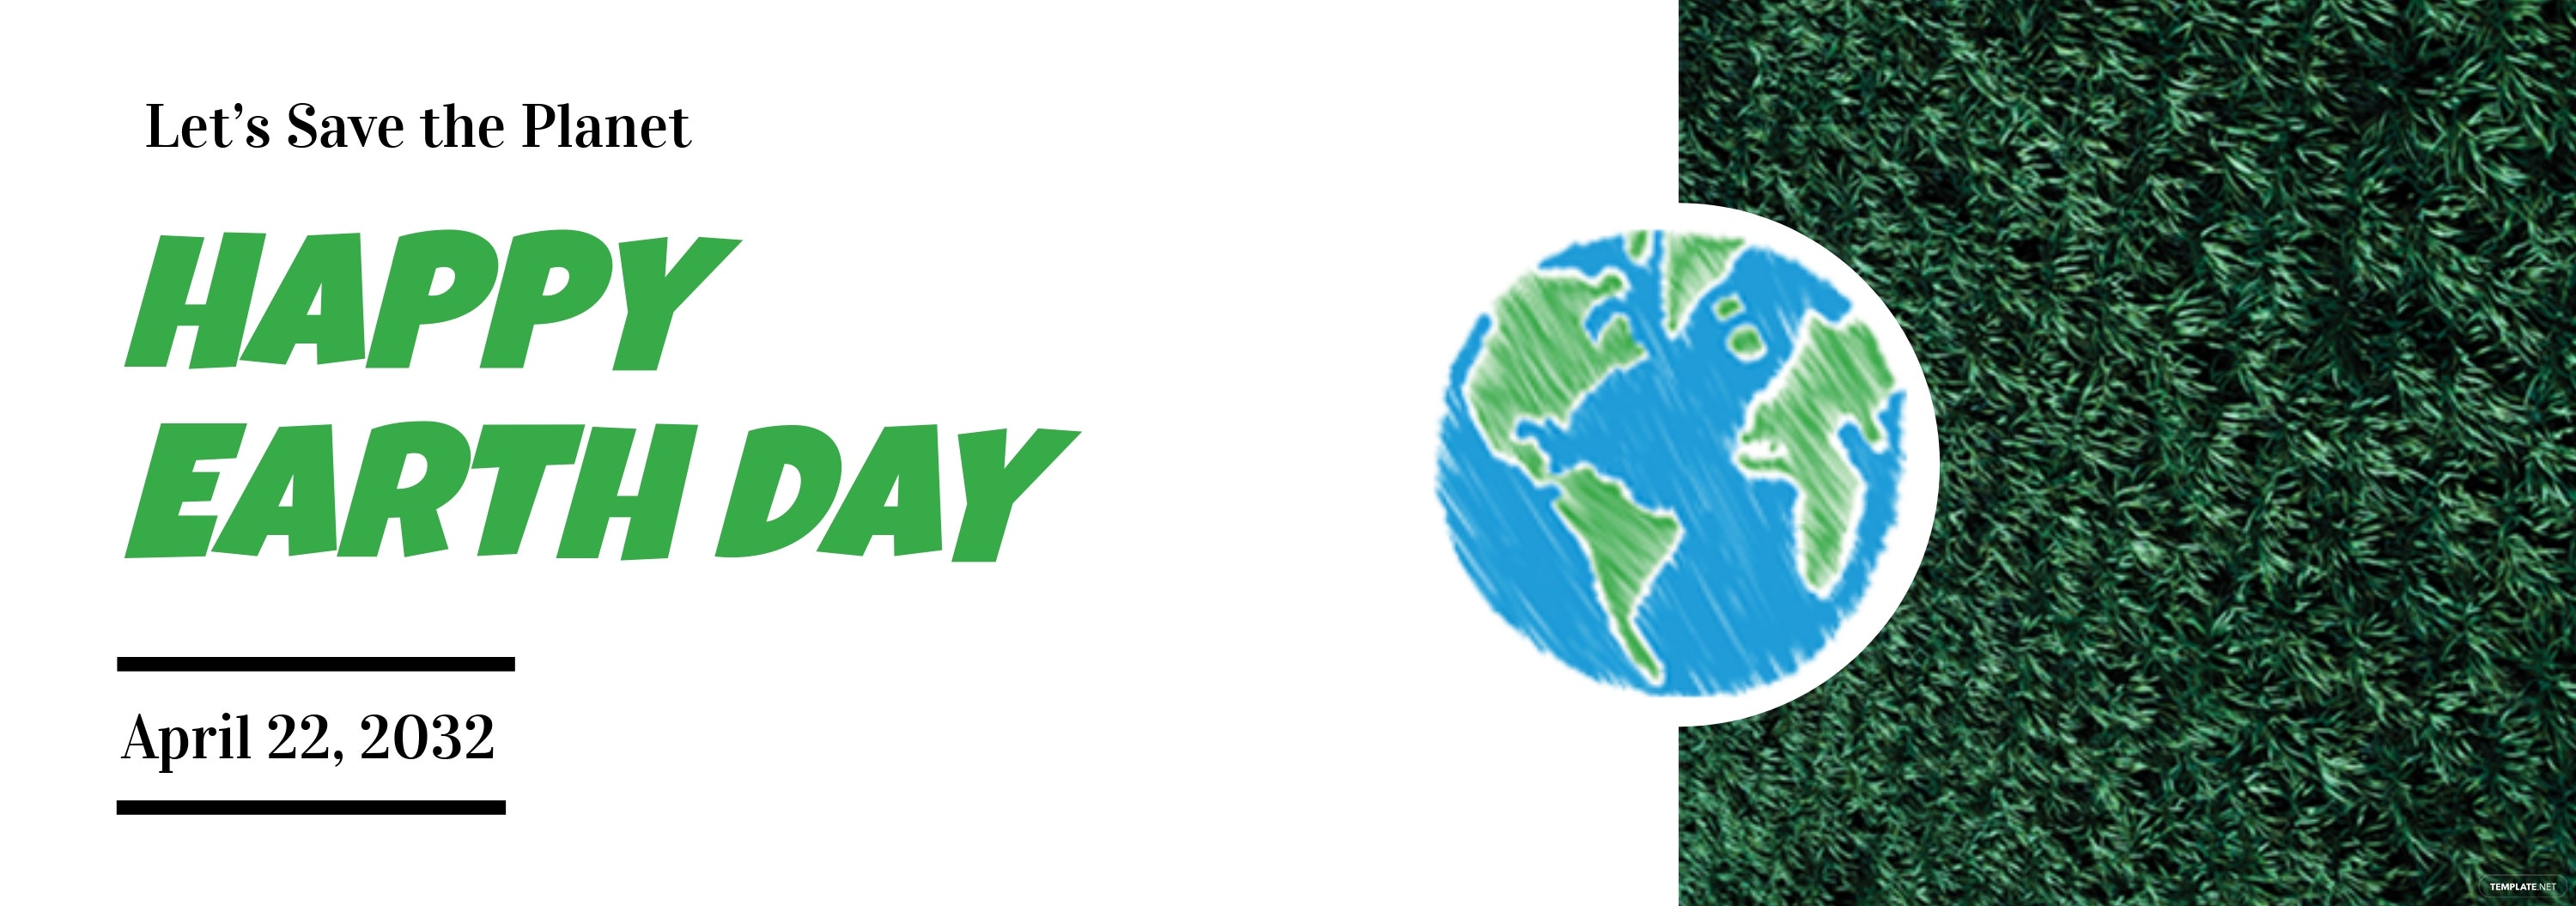 earth day tumblr banner template